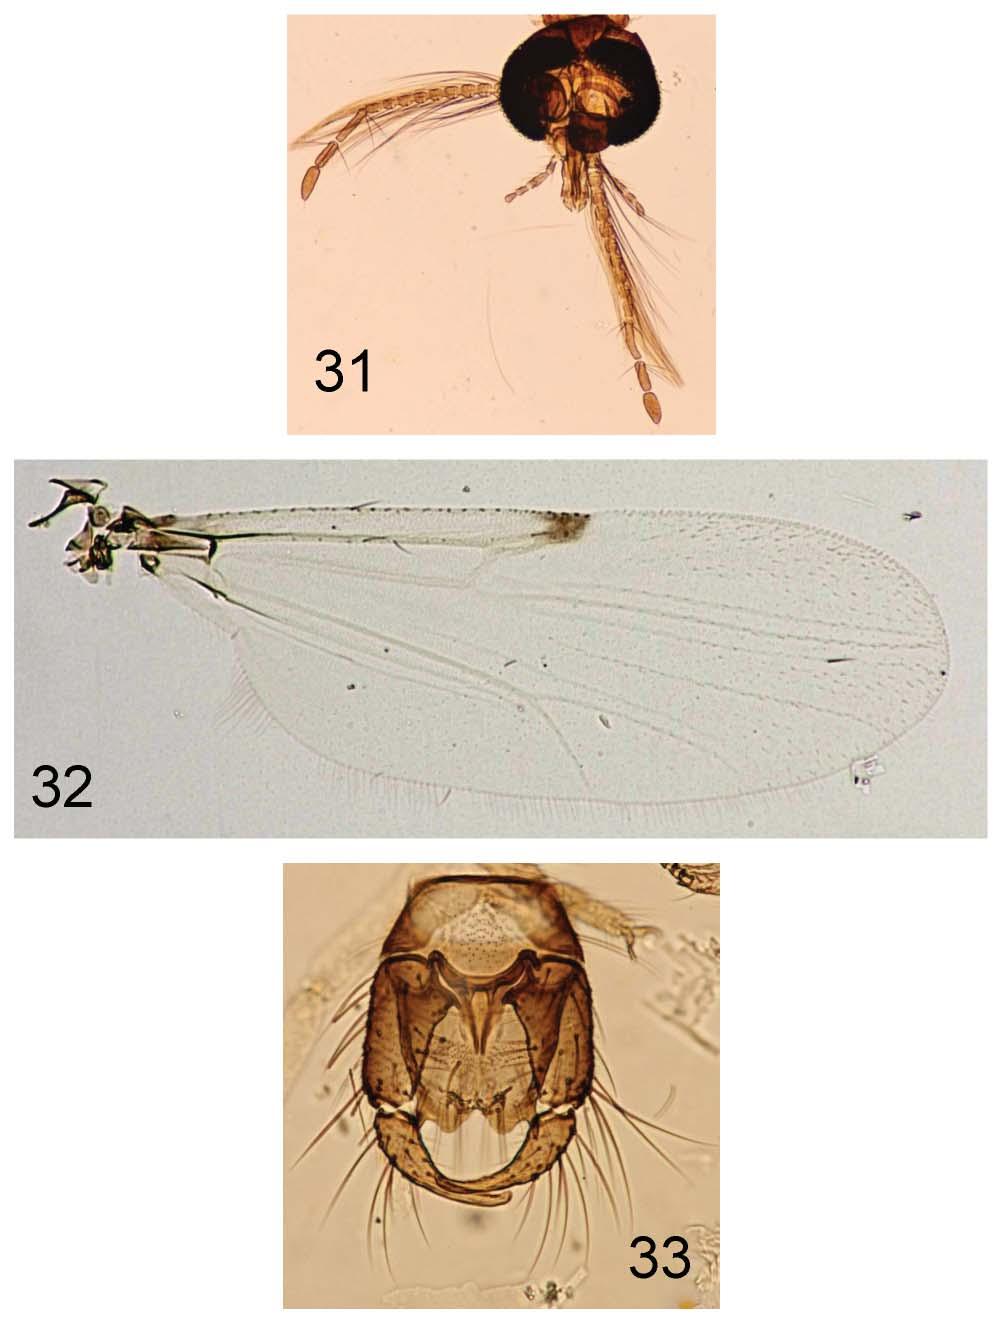 A REVISION OF THE BITING MIDGES INSECTA MUNDI 0441, August 2015 23 Figures 31 33.